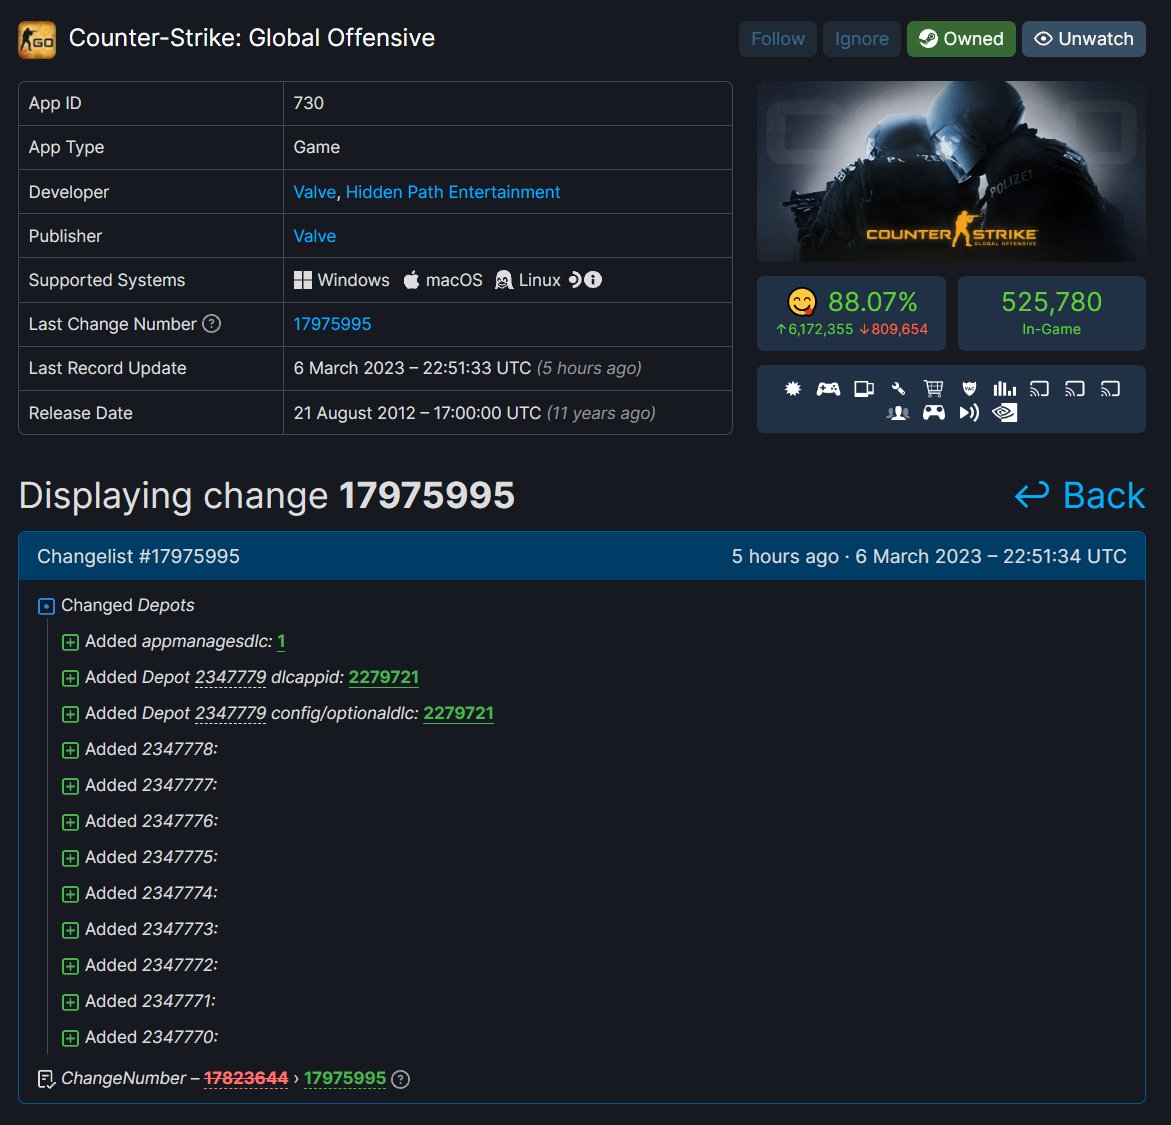 Aquarius on X: Let's recap everything that happened tonight: 1. CS:GO got  10 new depots, one of which is confirmed to be part of a DLC with AppID  2279721 (and according to